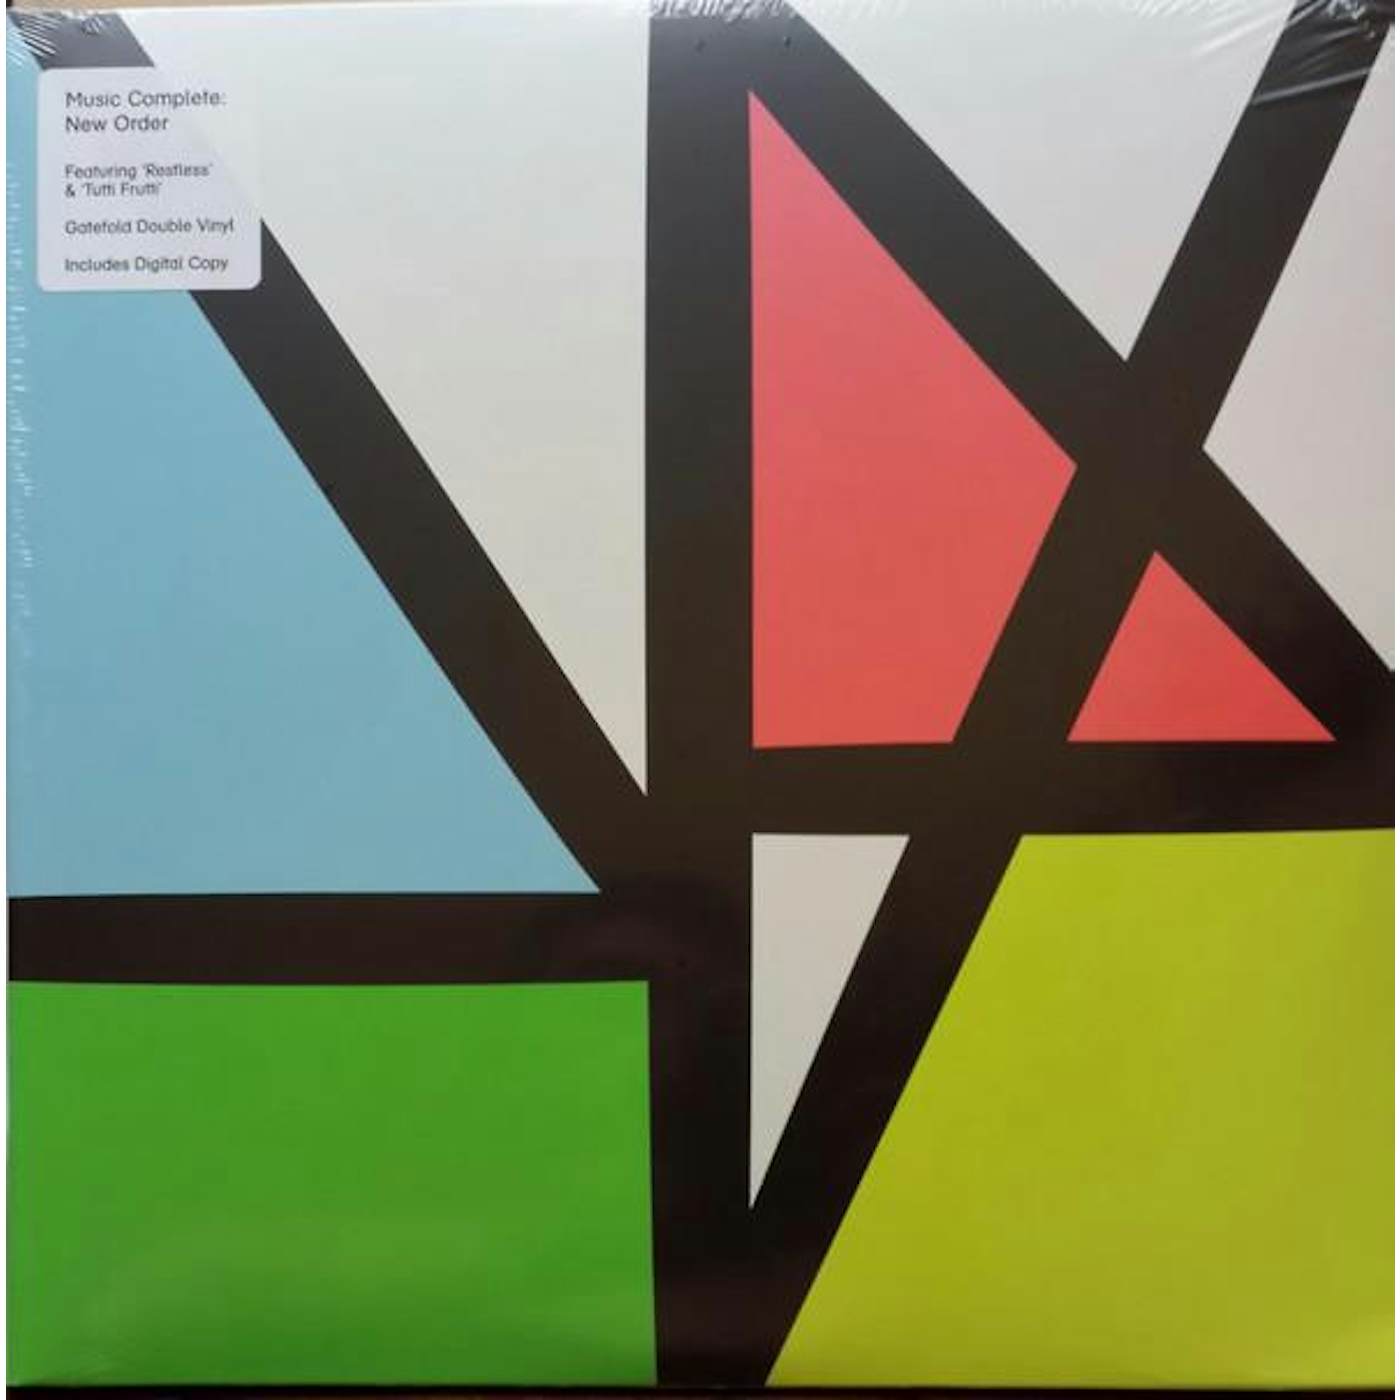 We have new order. New order Vinyl. New order обложки. New order Music complete. Обложка technique New order.